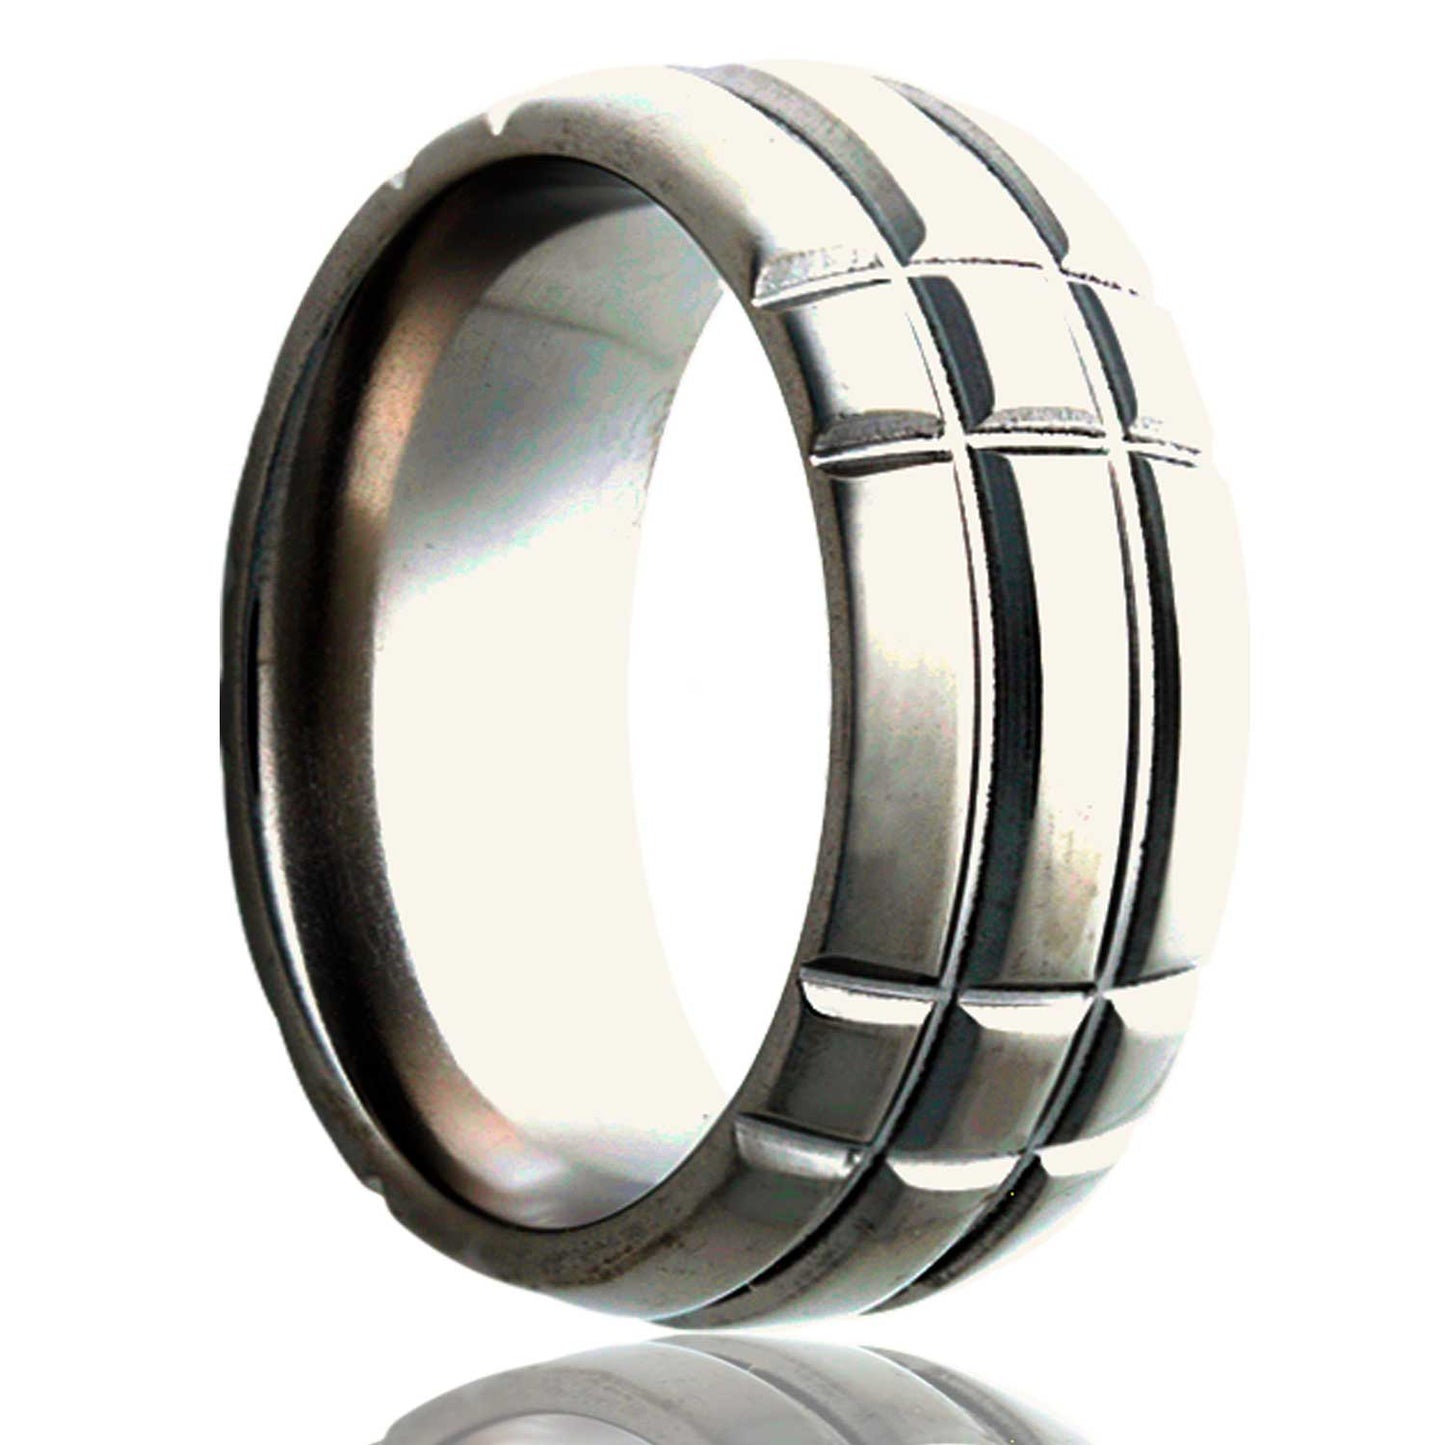 A intersecting grooves domed titanium wedding band displayed on a neutral white background.